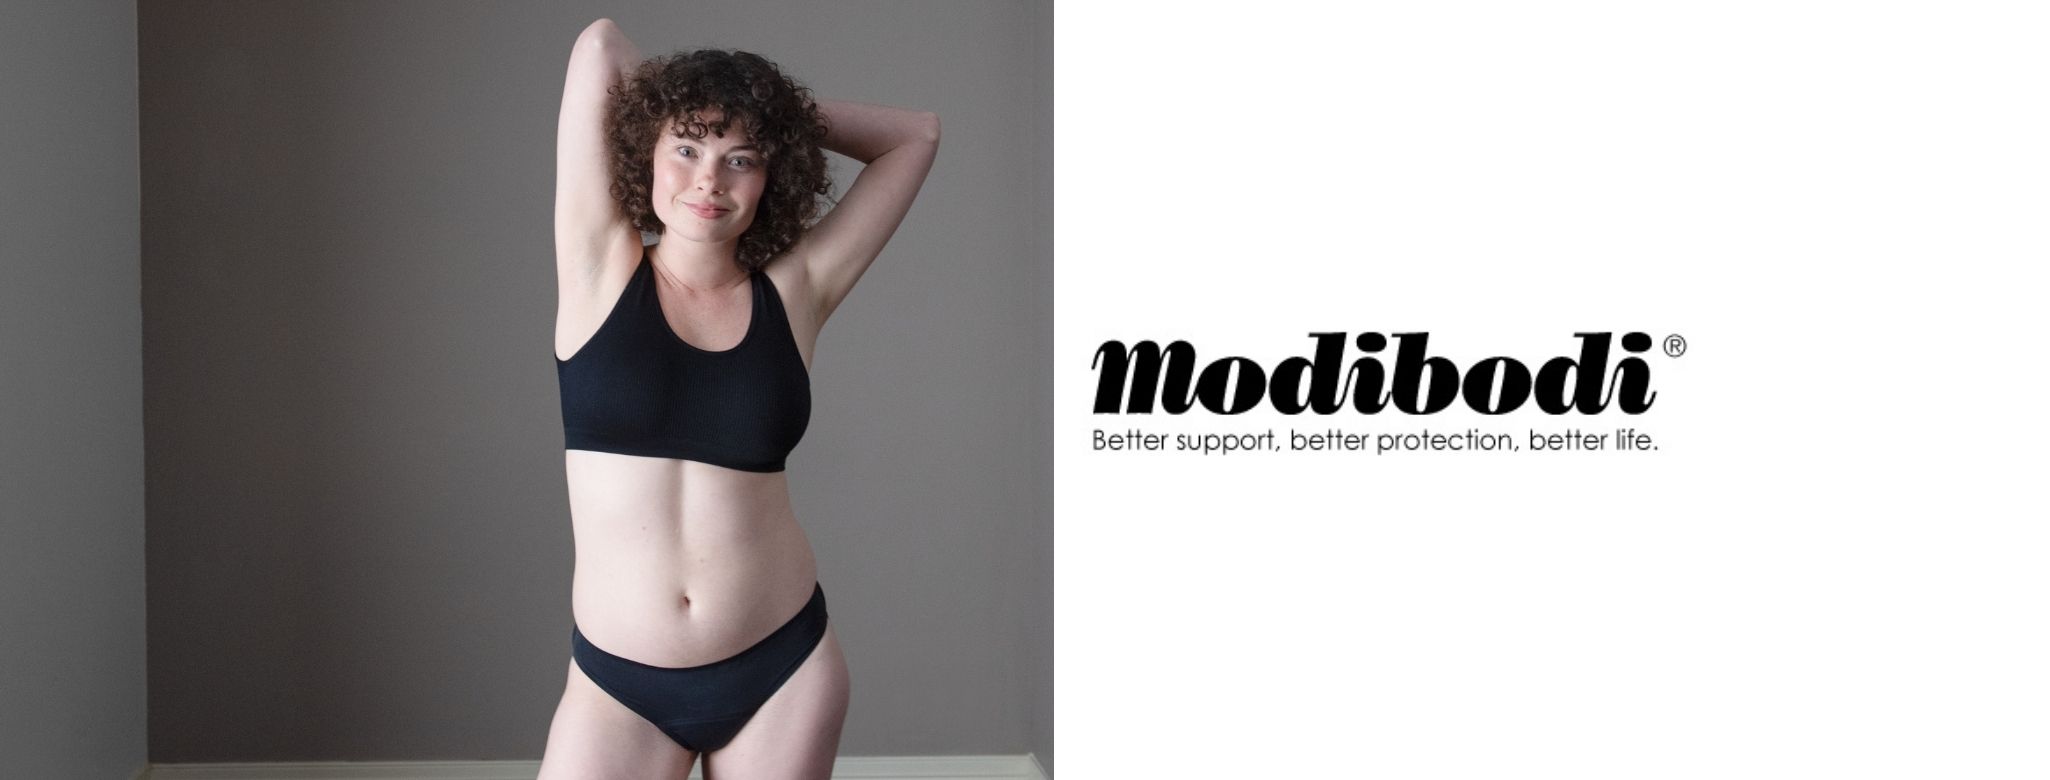 Shh, Modibodi 20% OFF when you buy 2 or more from Heavy-Overnight styles with discount code